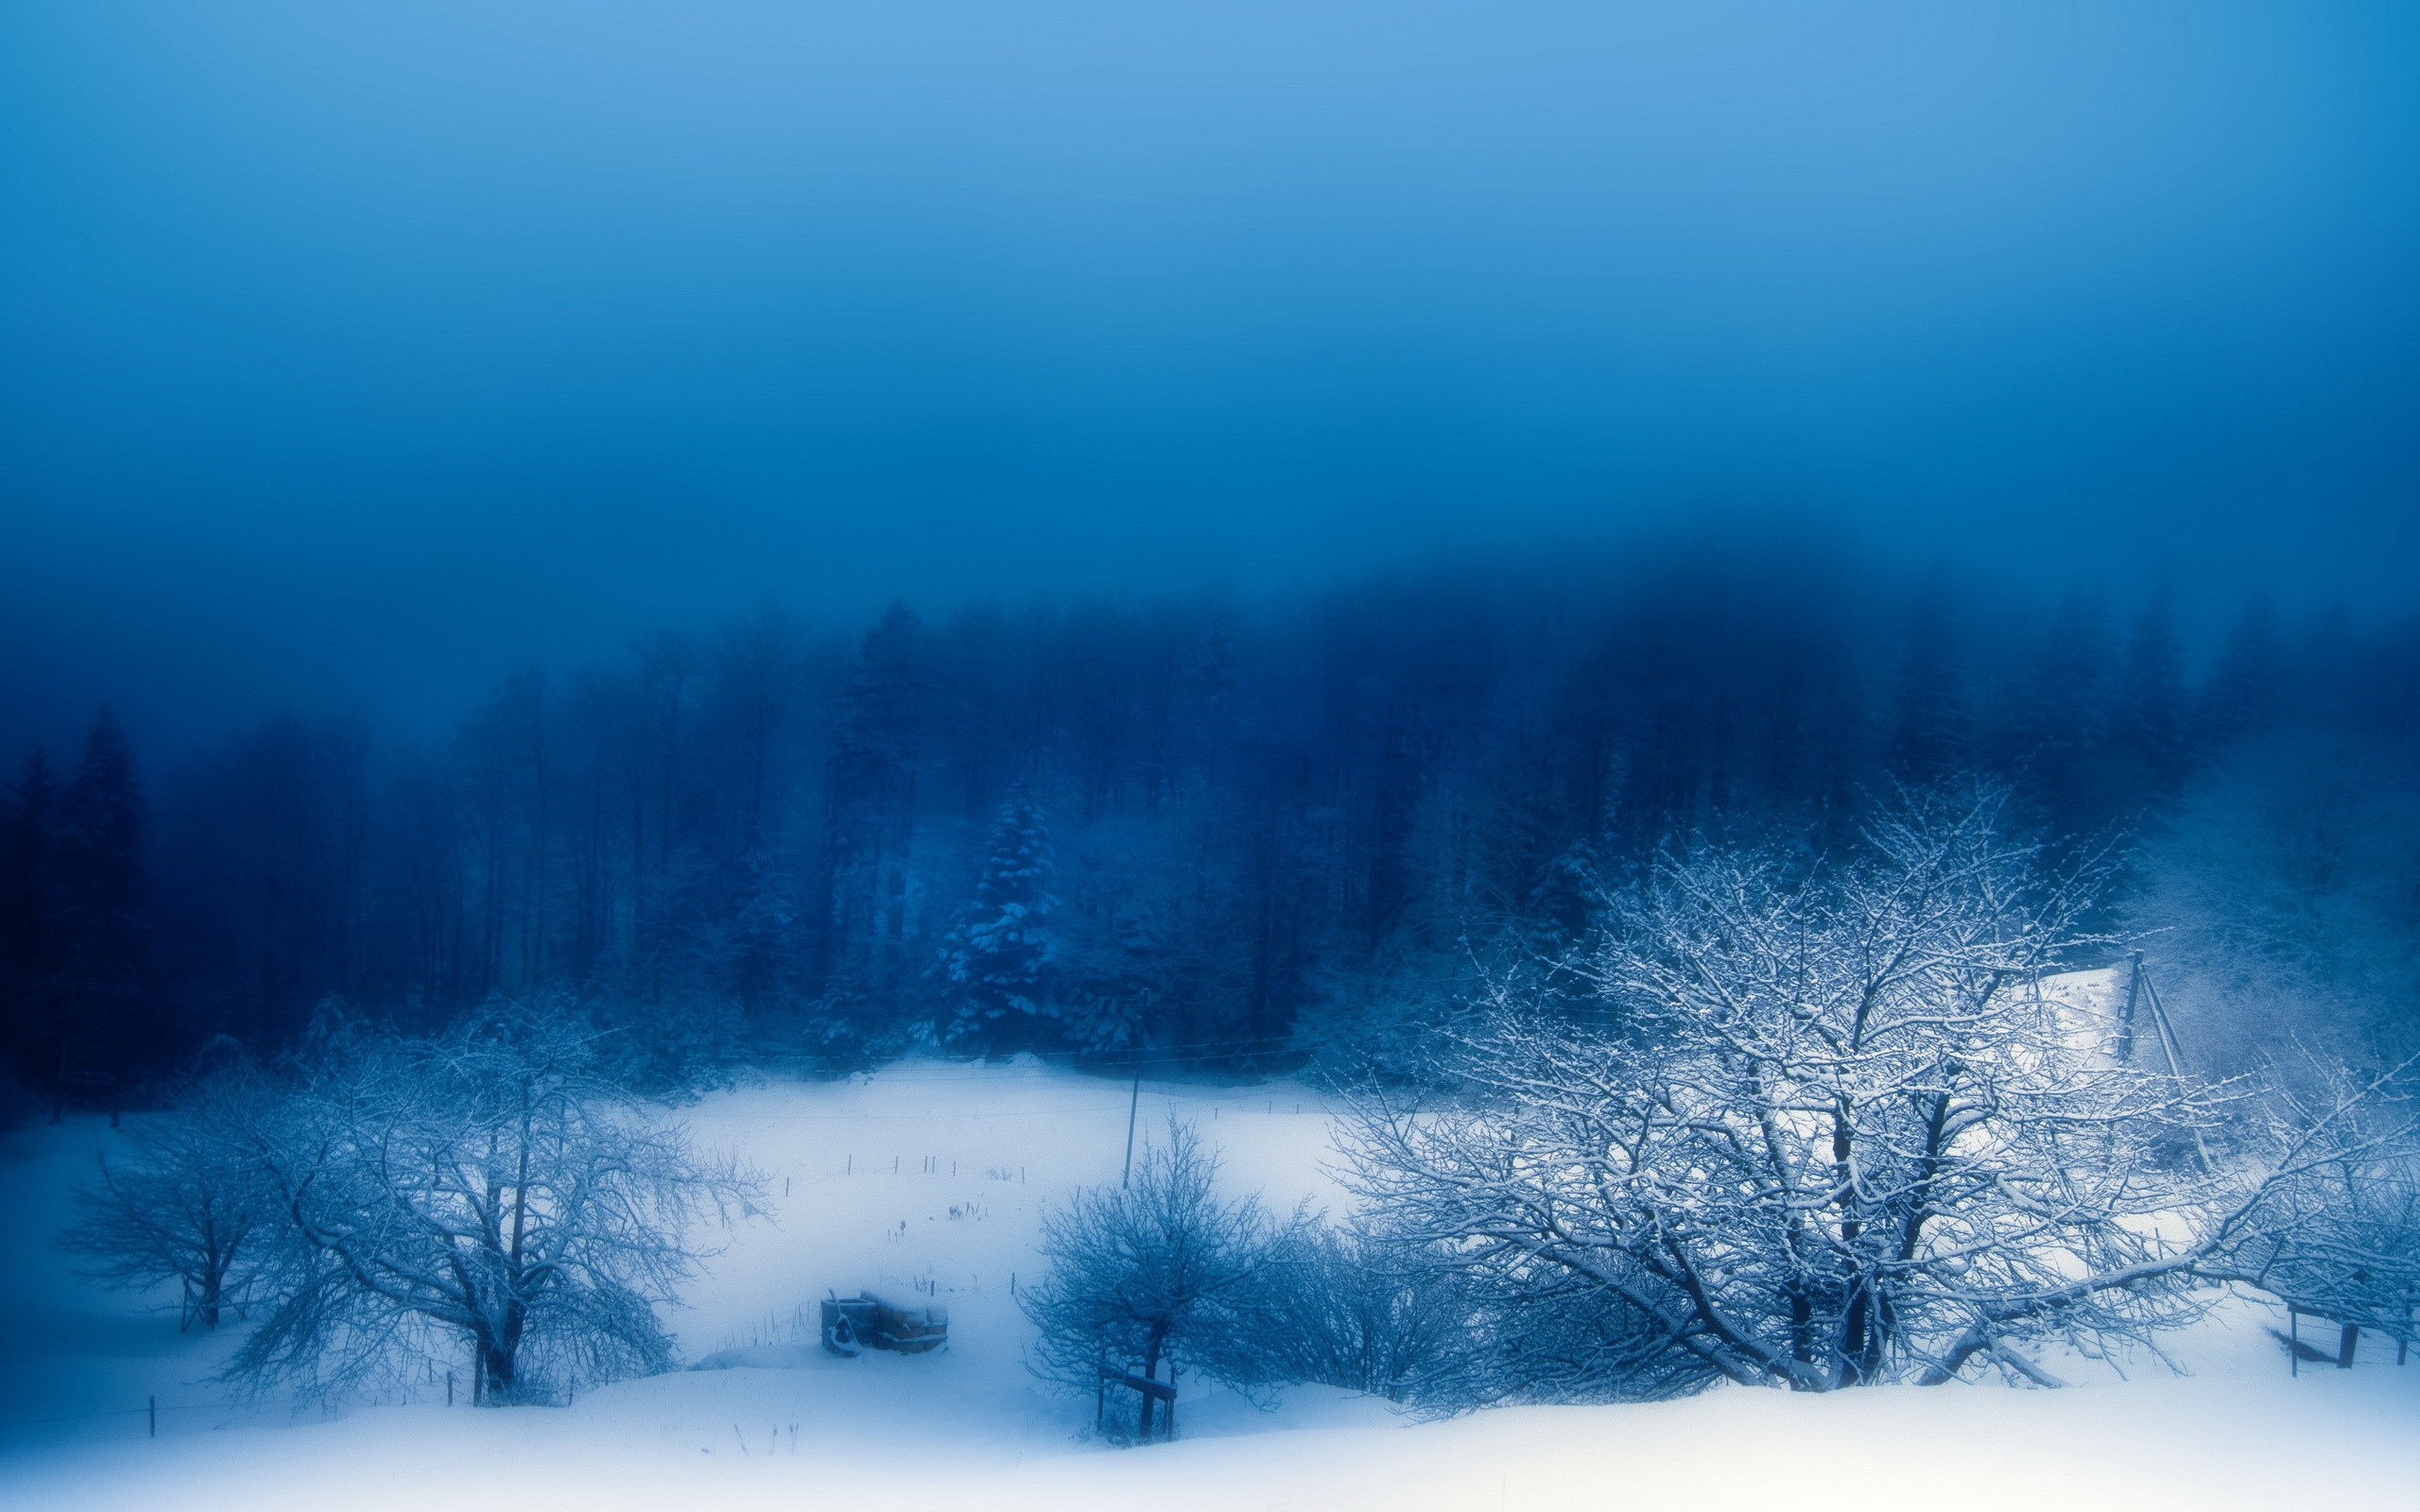 General 2560x1600 winter landscape snow nature blue cold outdoors